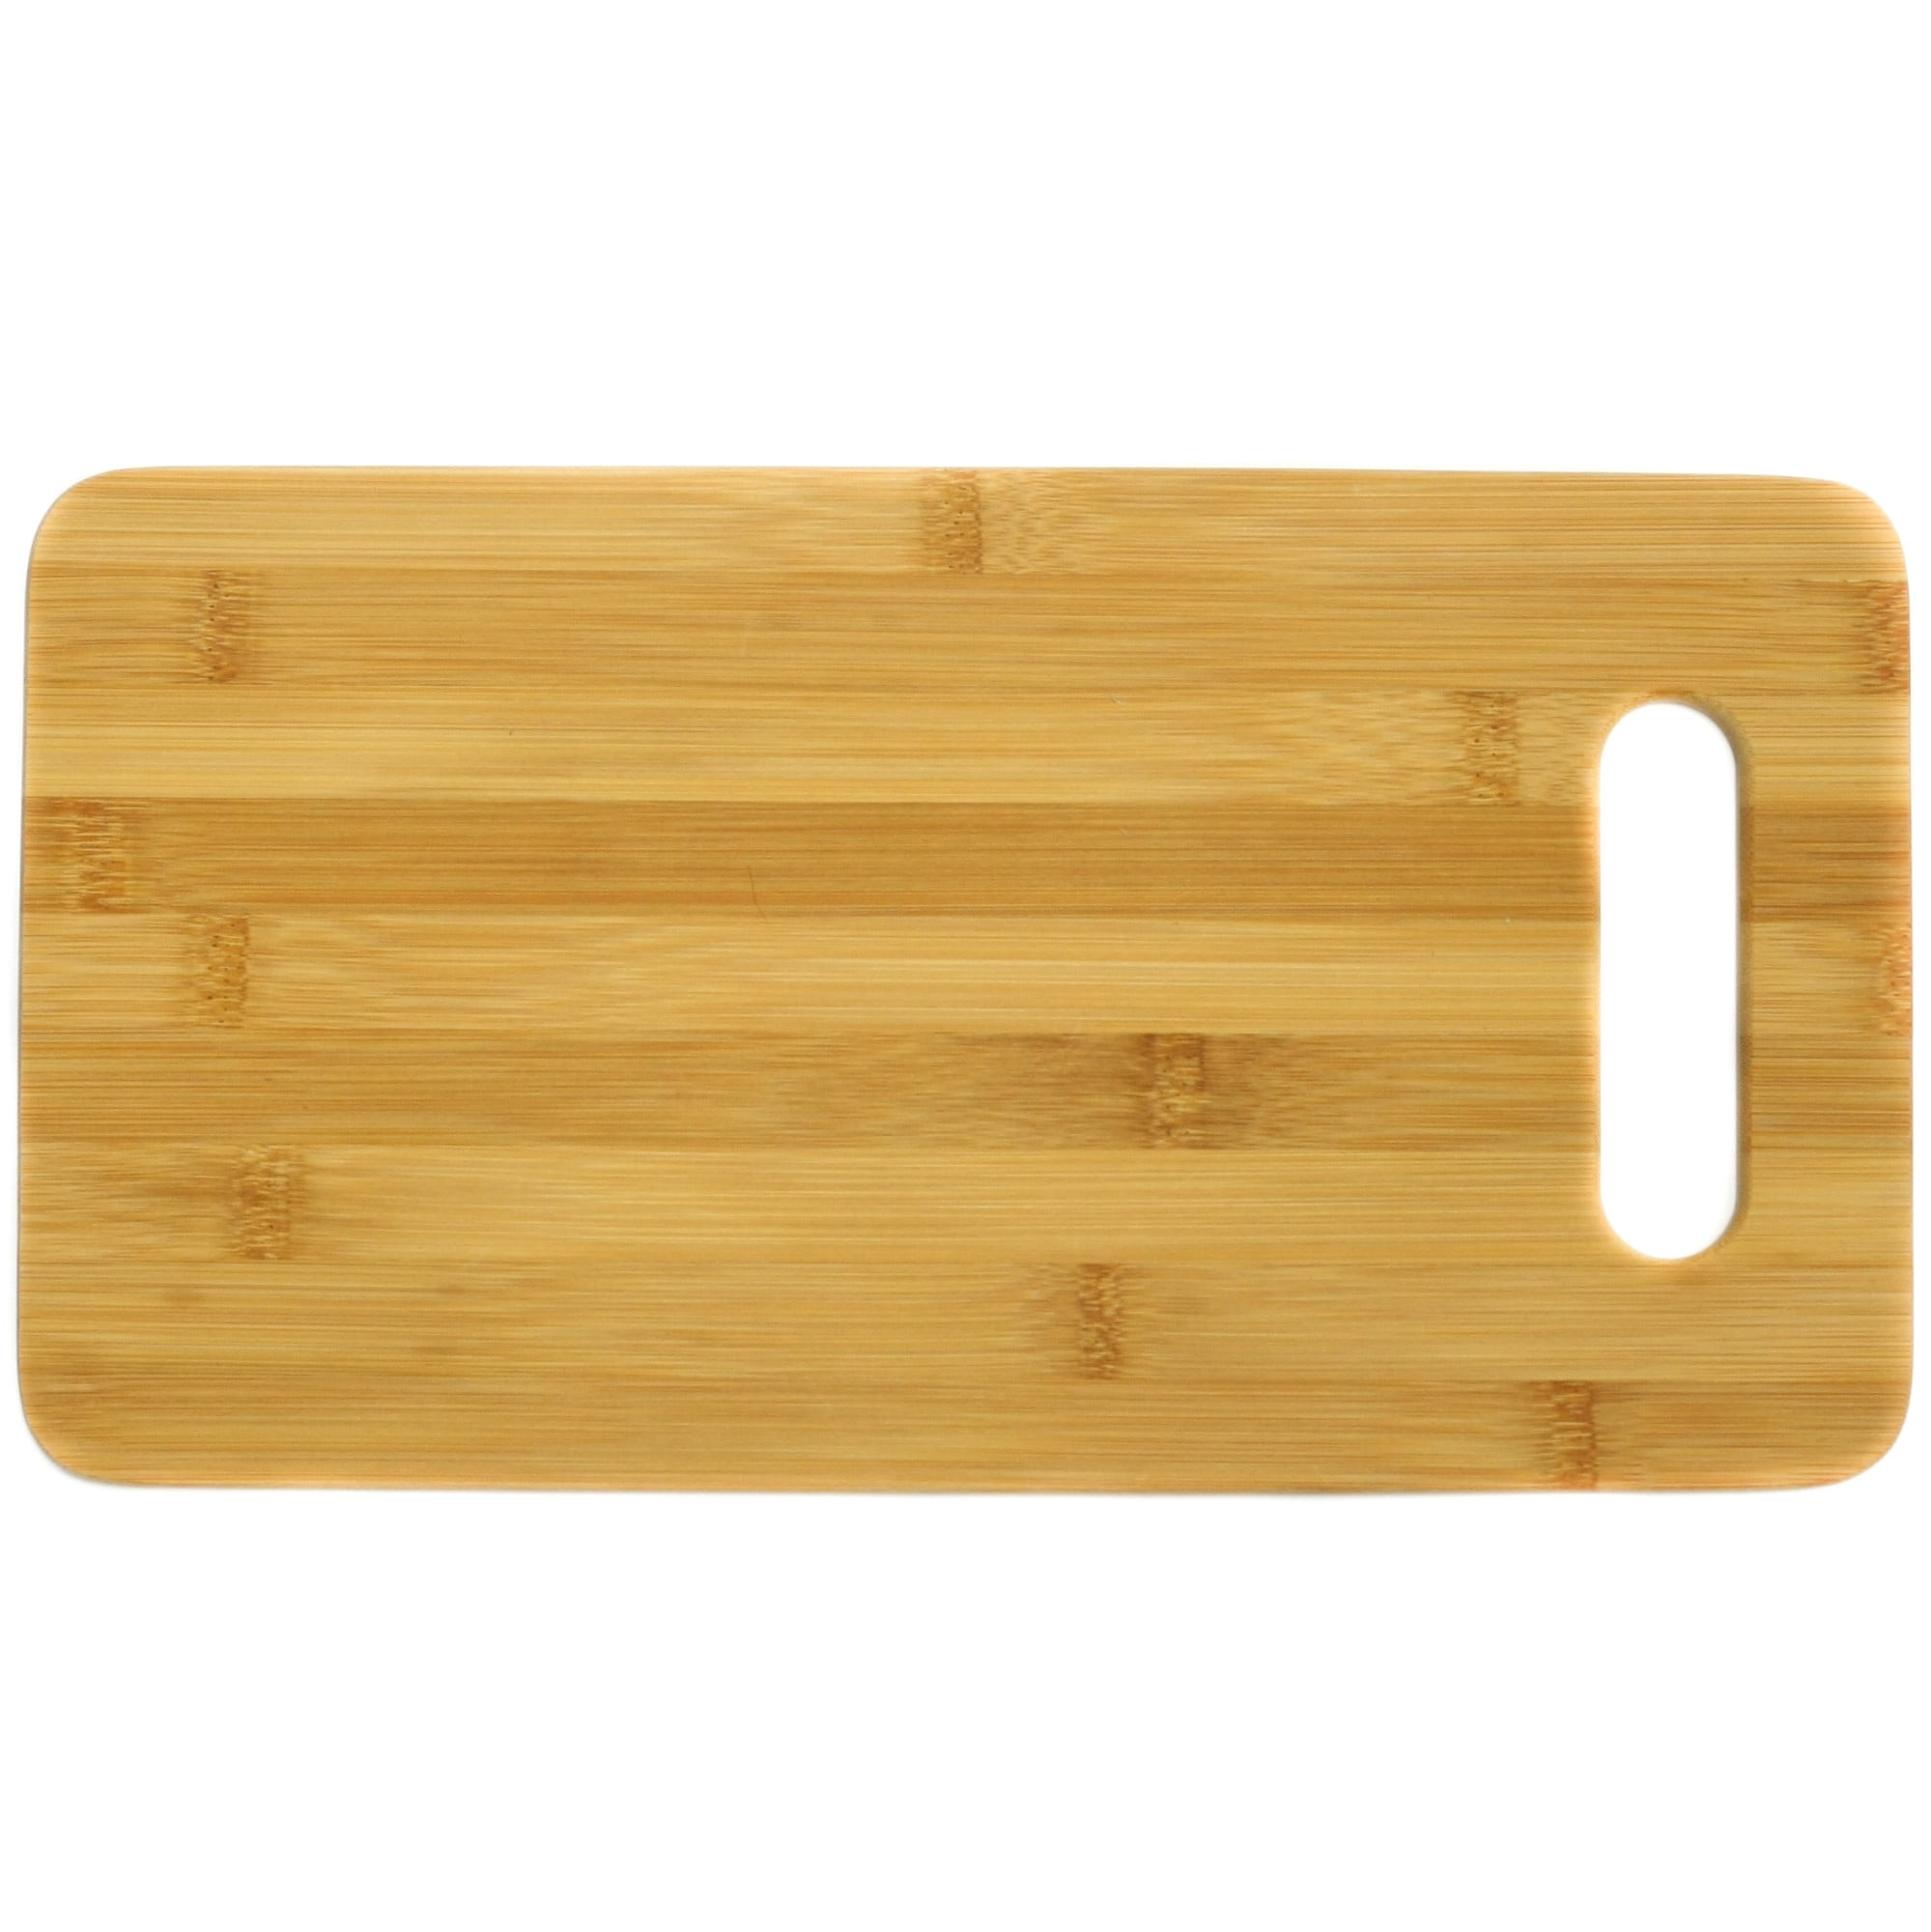 Bamboo Cutting Board with Handle Cutout, Small - CM417A - IdeaStage  Promotional Products